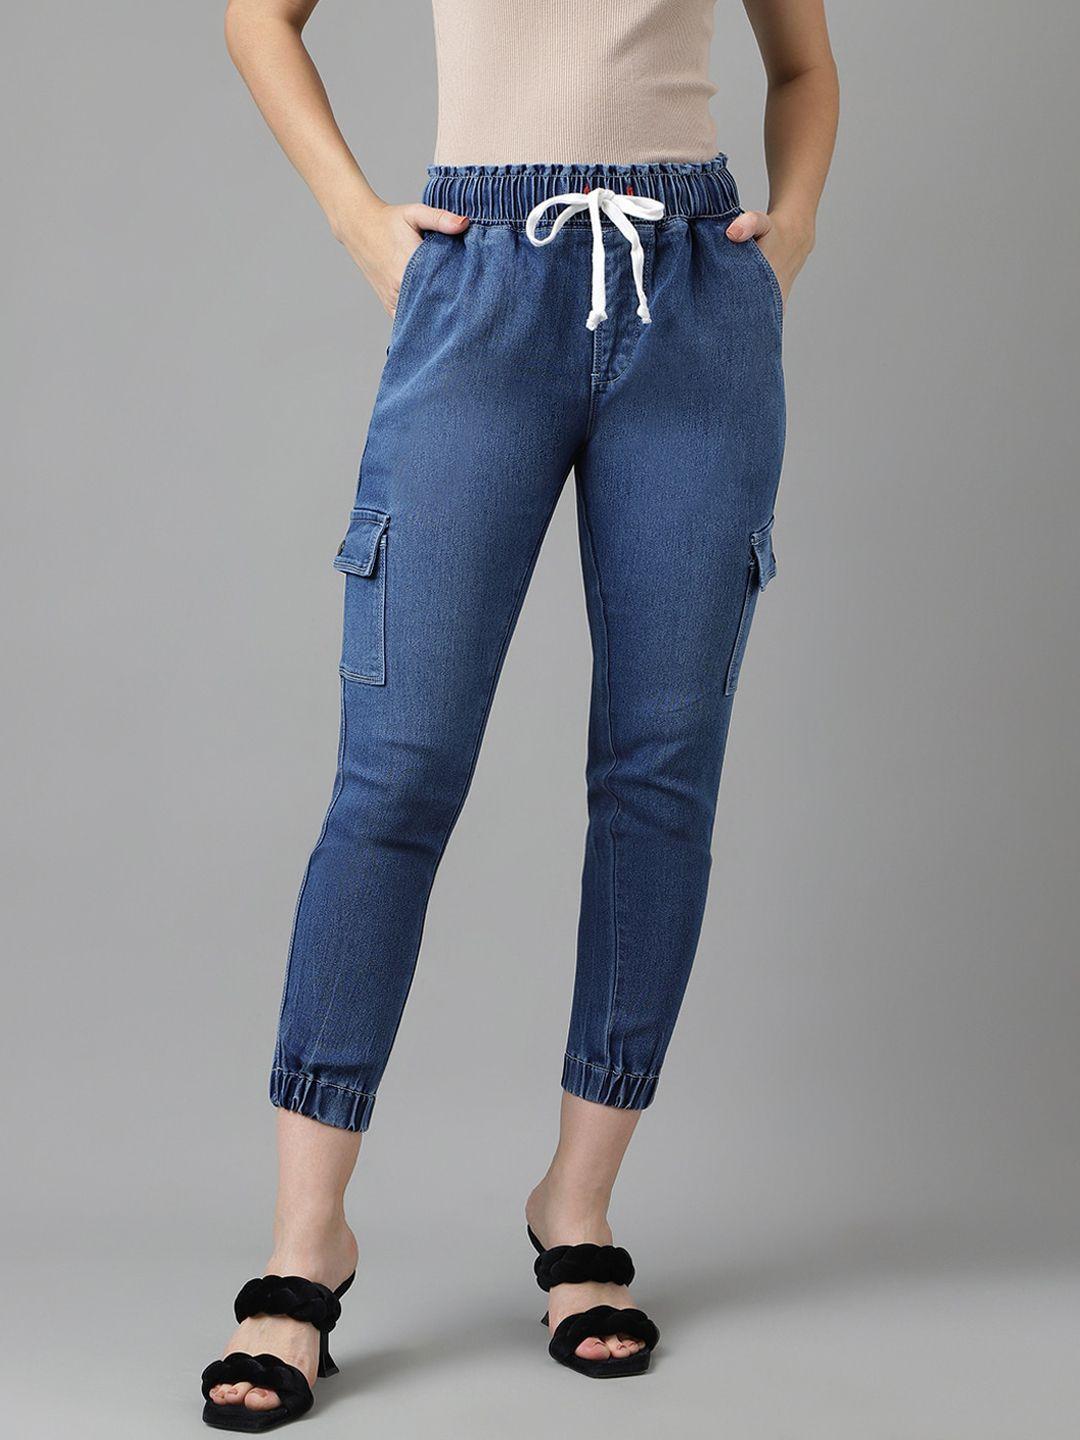 code 61 women jogger mid-rise stretchable cropped jeans